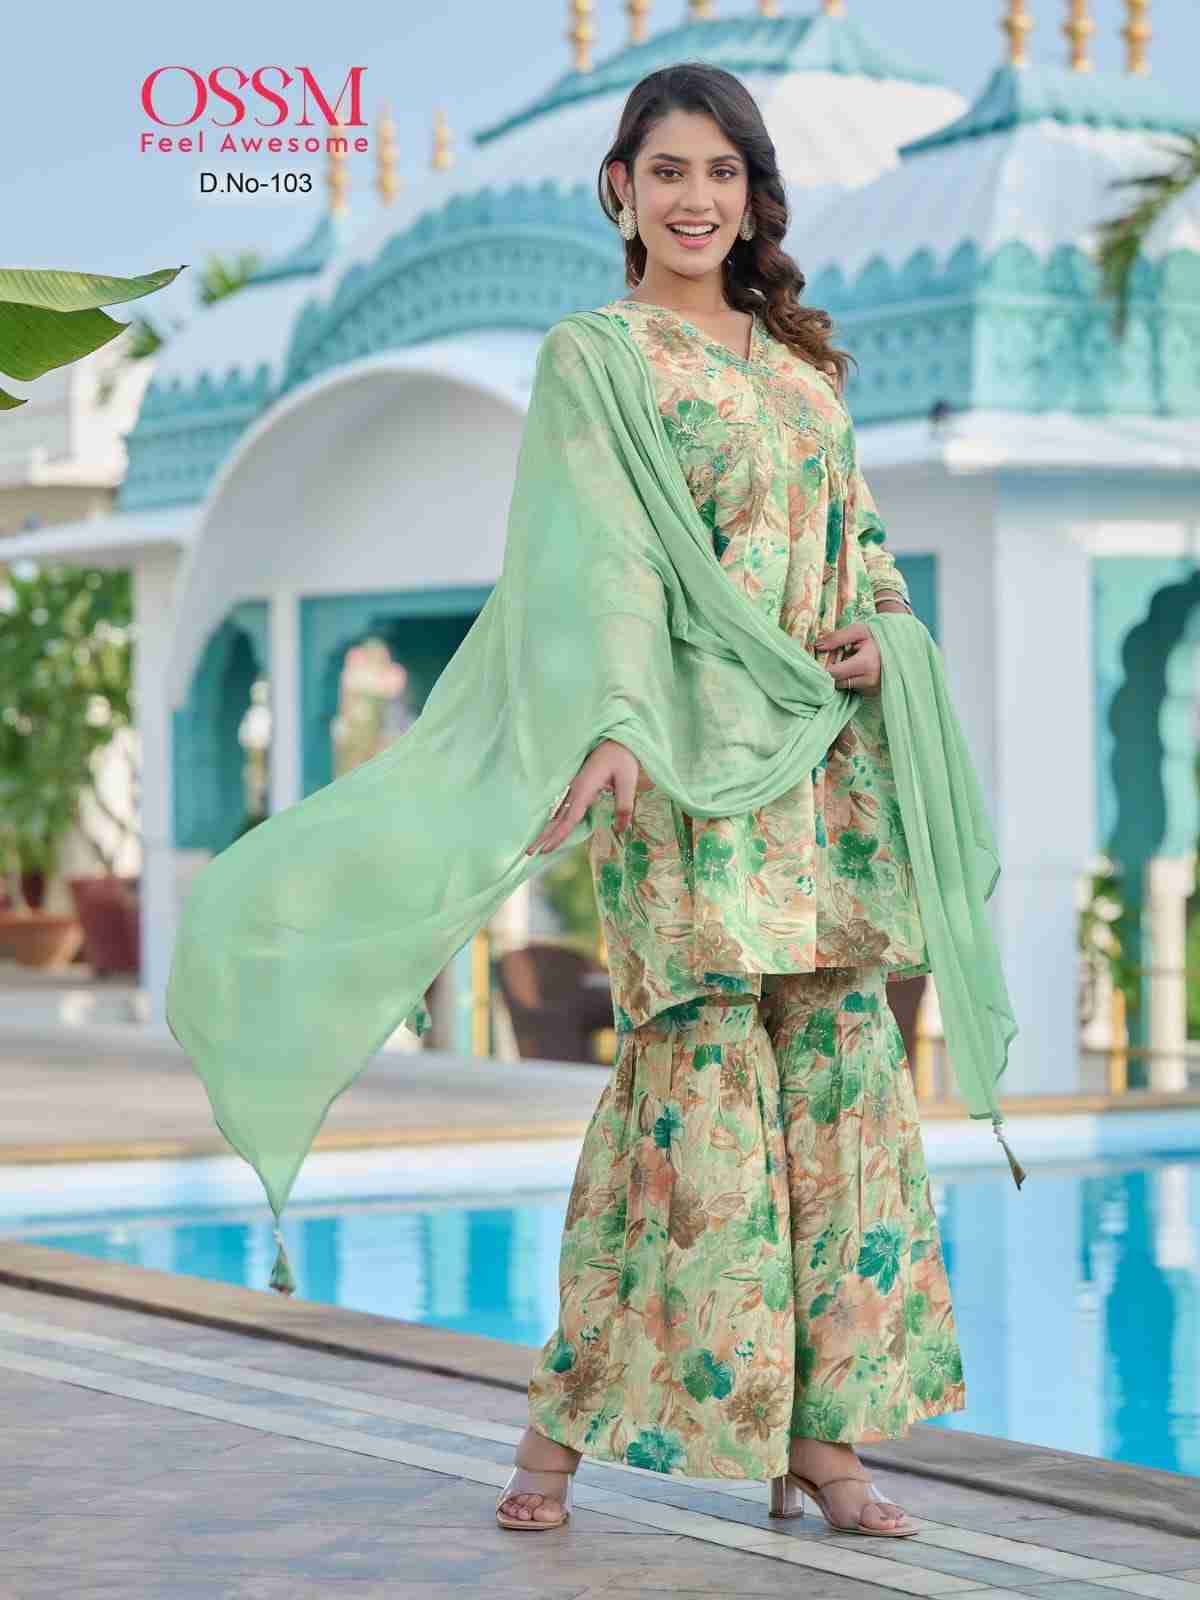 Cotton sharara suit💗 | Pretty outfits, Dress indian style, Indian fashion  dresses